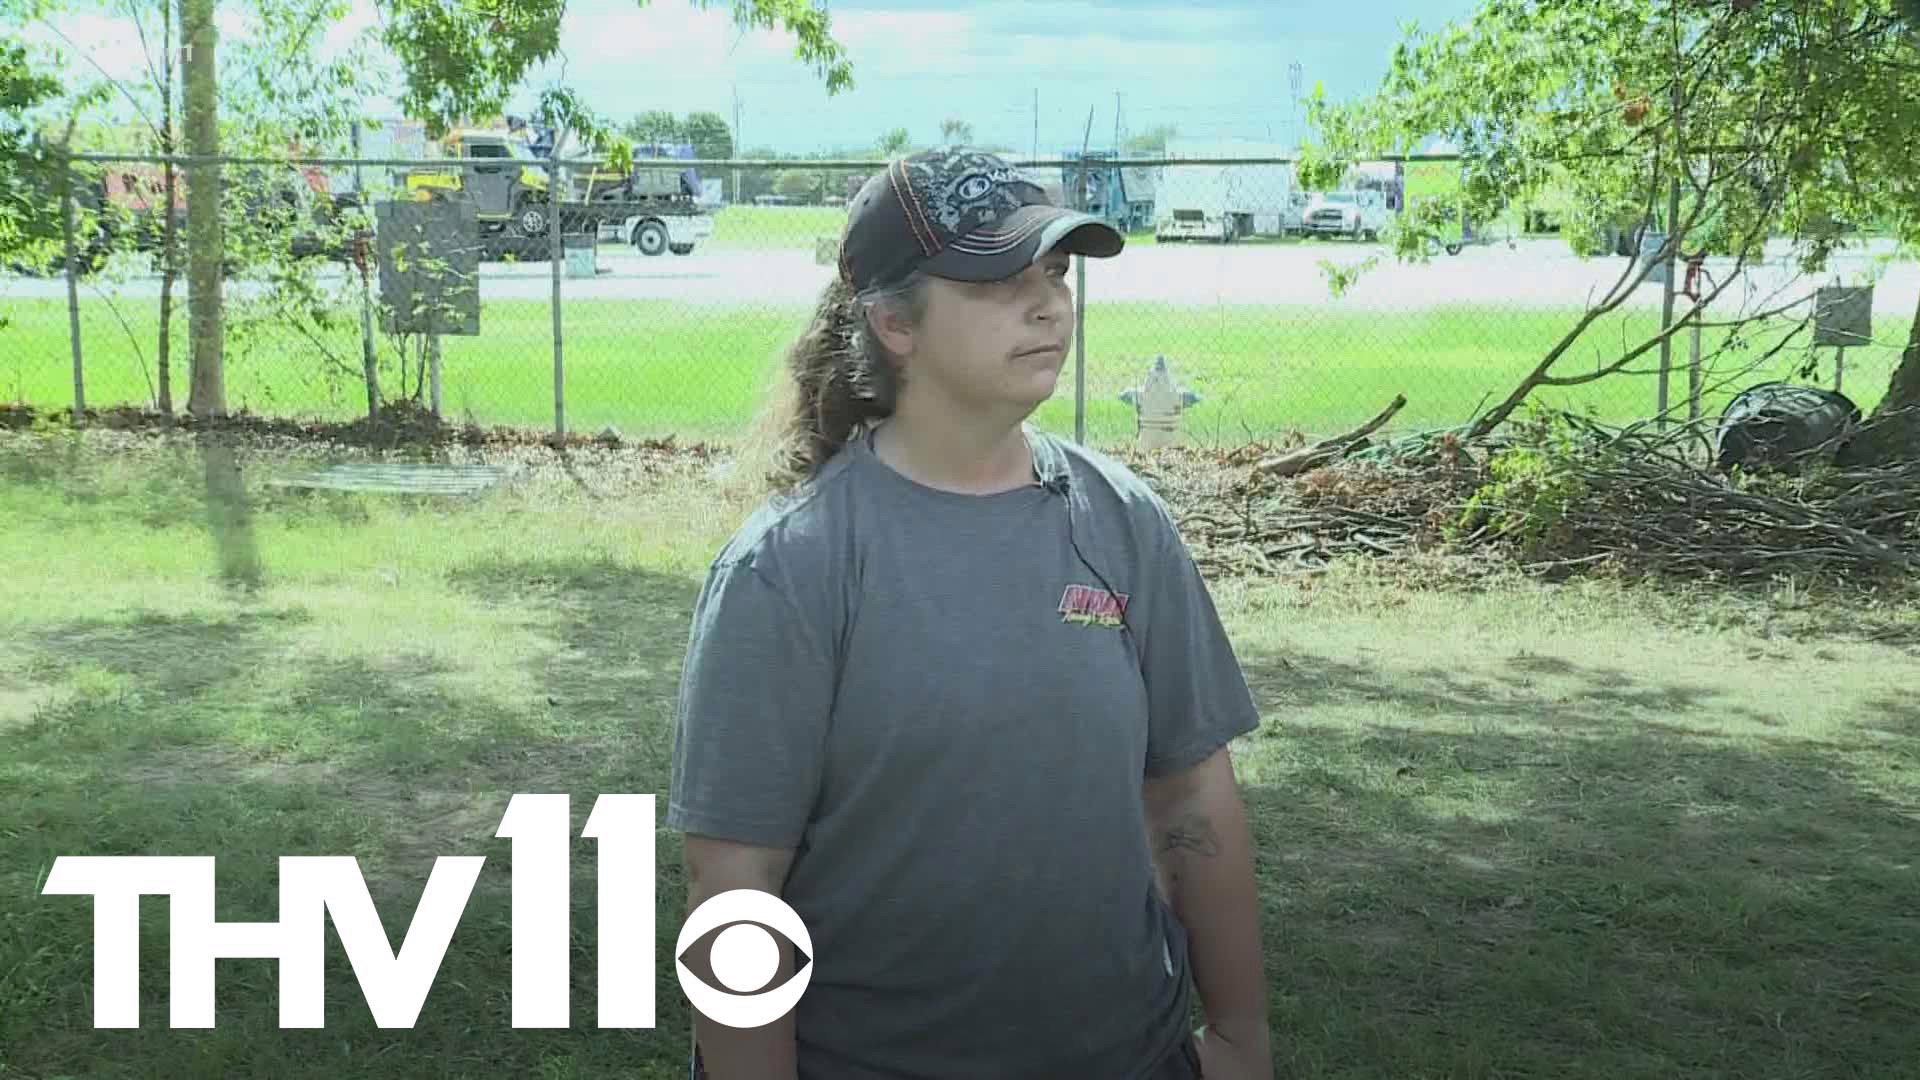 Crowds began to scatter as they heard gunfire at the Washington County Fair, but one Arkansas woman didn't run-- sticking around to help a young victim in need.